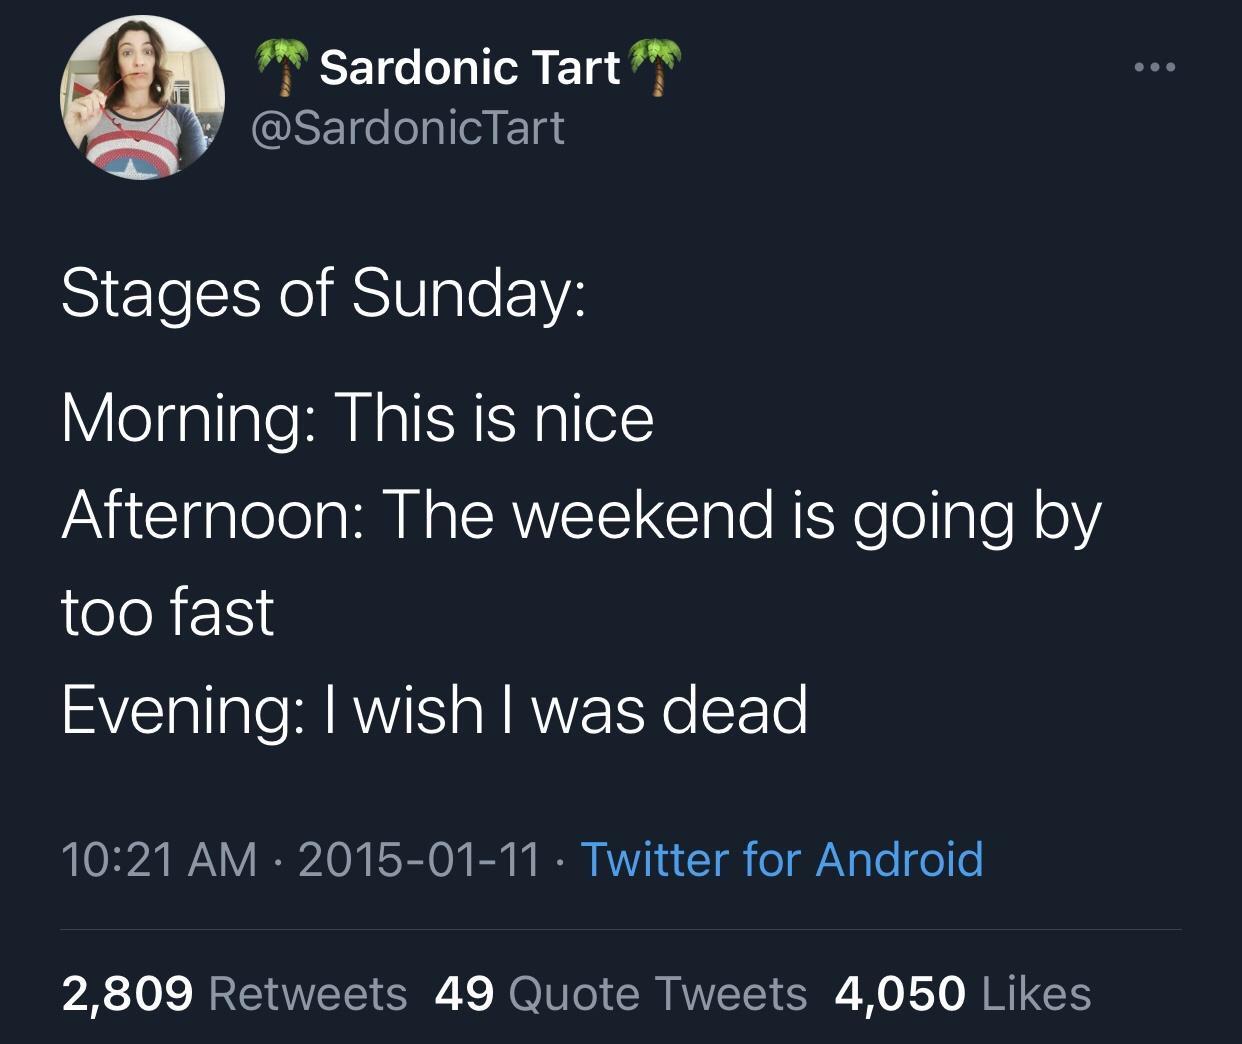 presentation - Sardonic Tart Stages of Sunday Morning This is nice Afternoon The weekend is going by too fast Evening I wish I was dead Twitter for Android 2,809 49 Quote Tweets 4,050